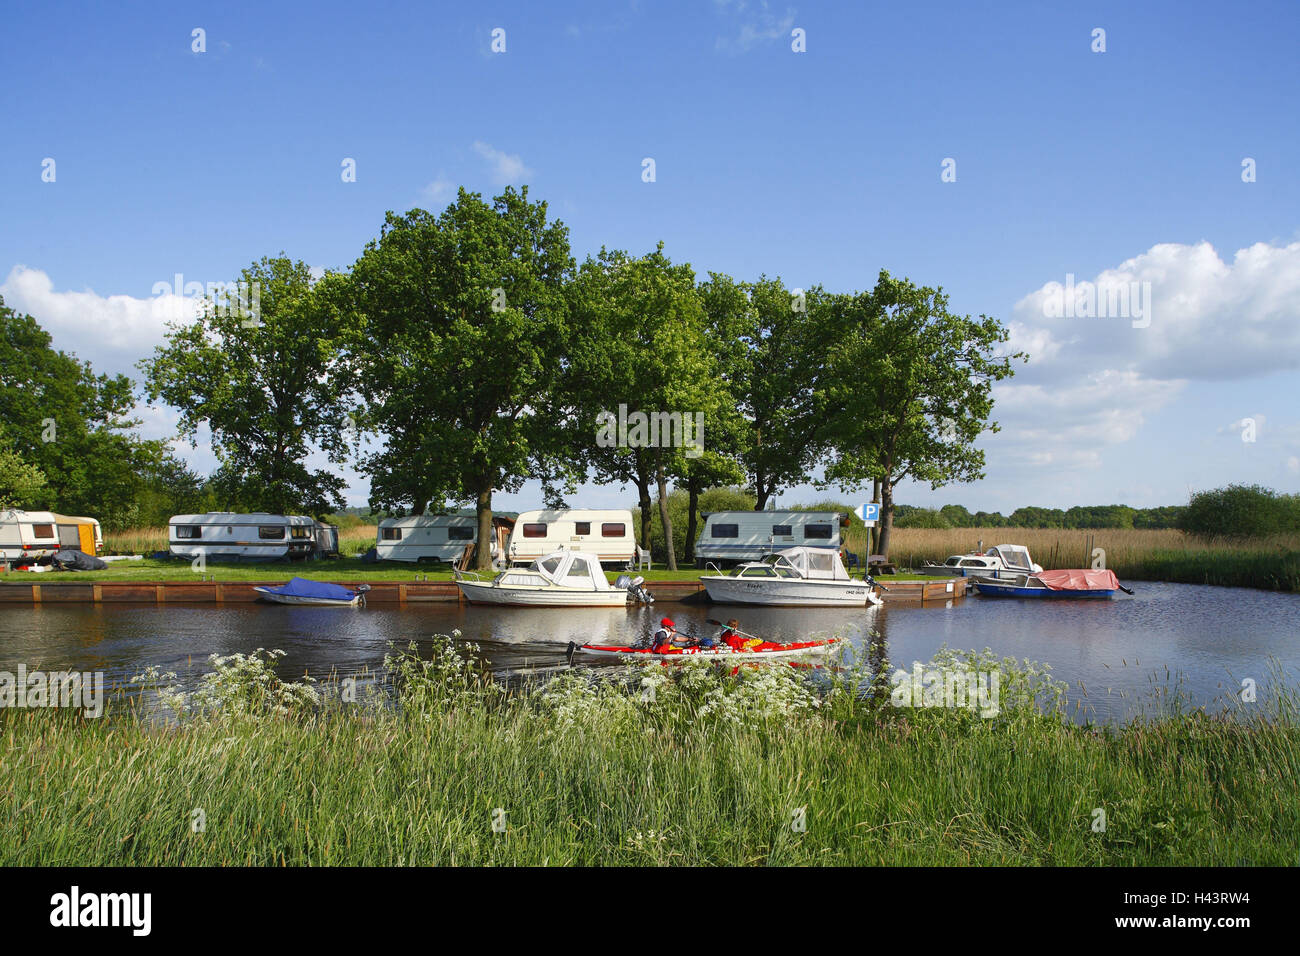 Worpswede, river Hamme with new Helgoland, boots, Wohnwägen, Stock Photo